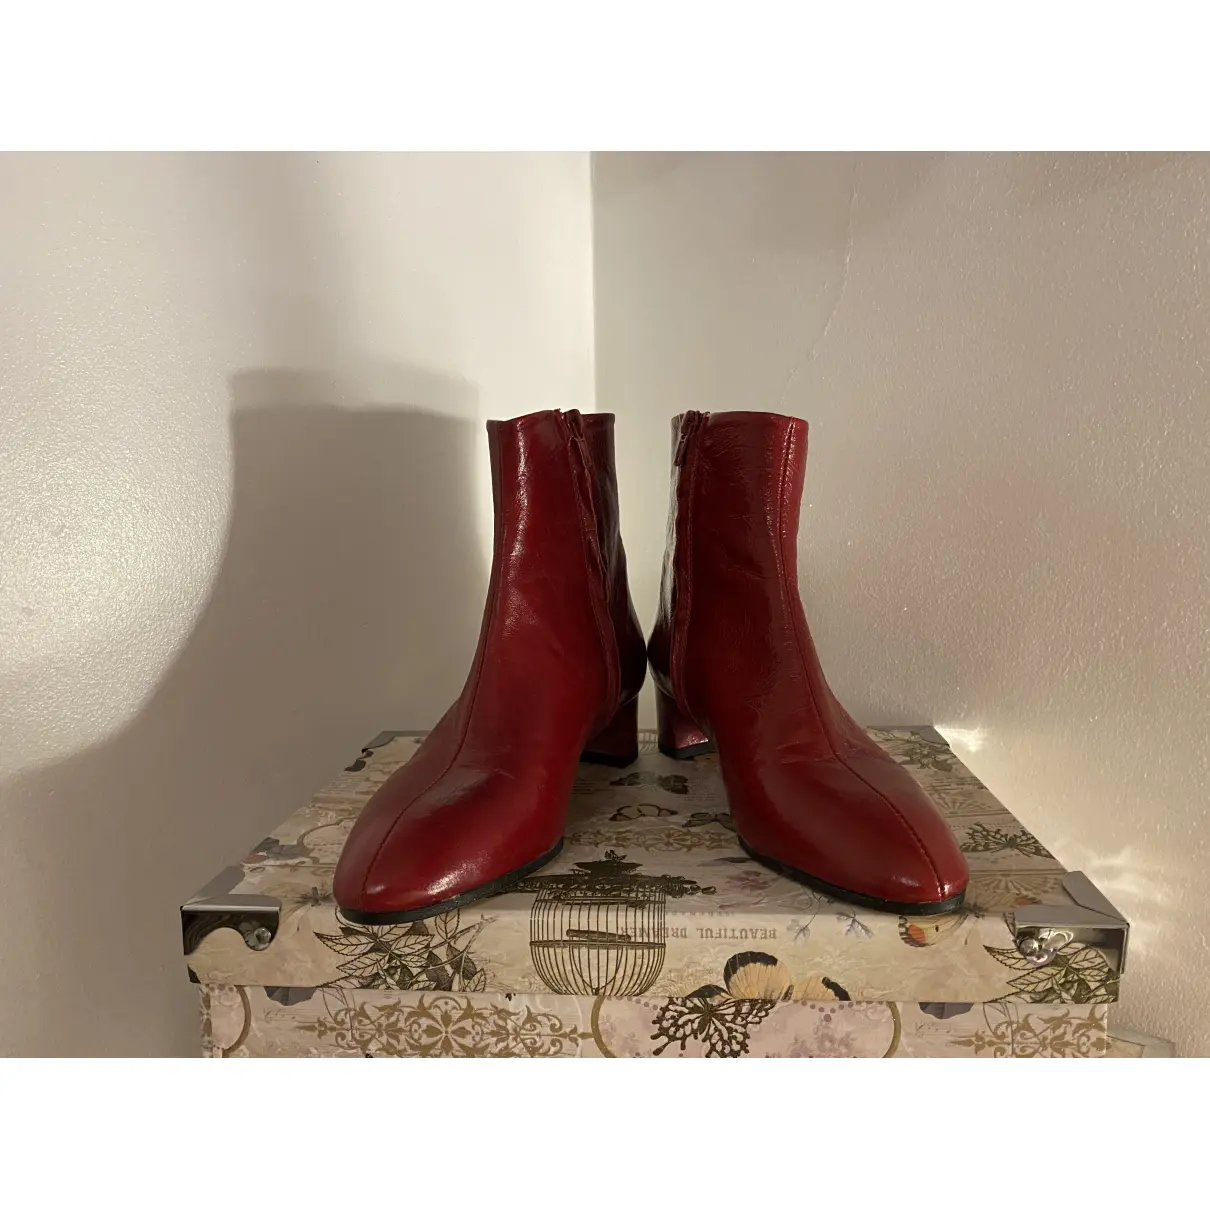 Patent leather boots Zara